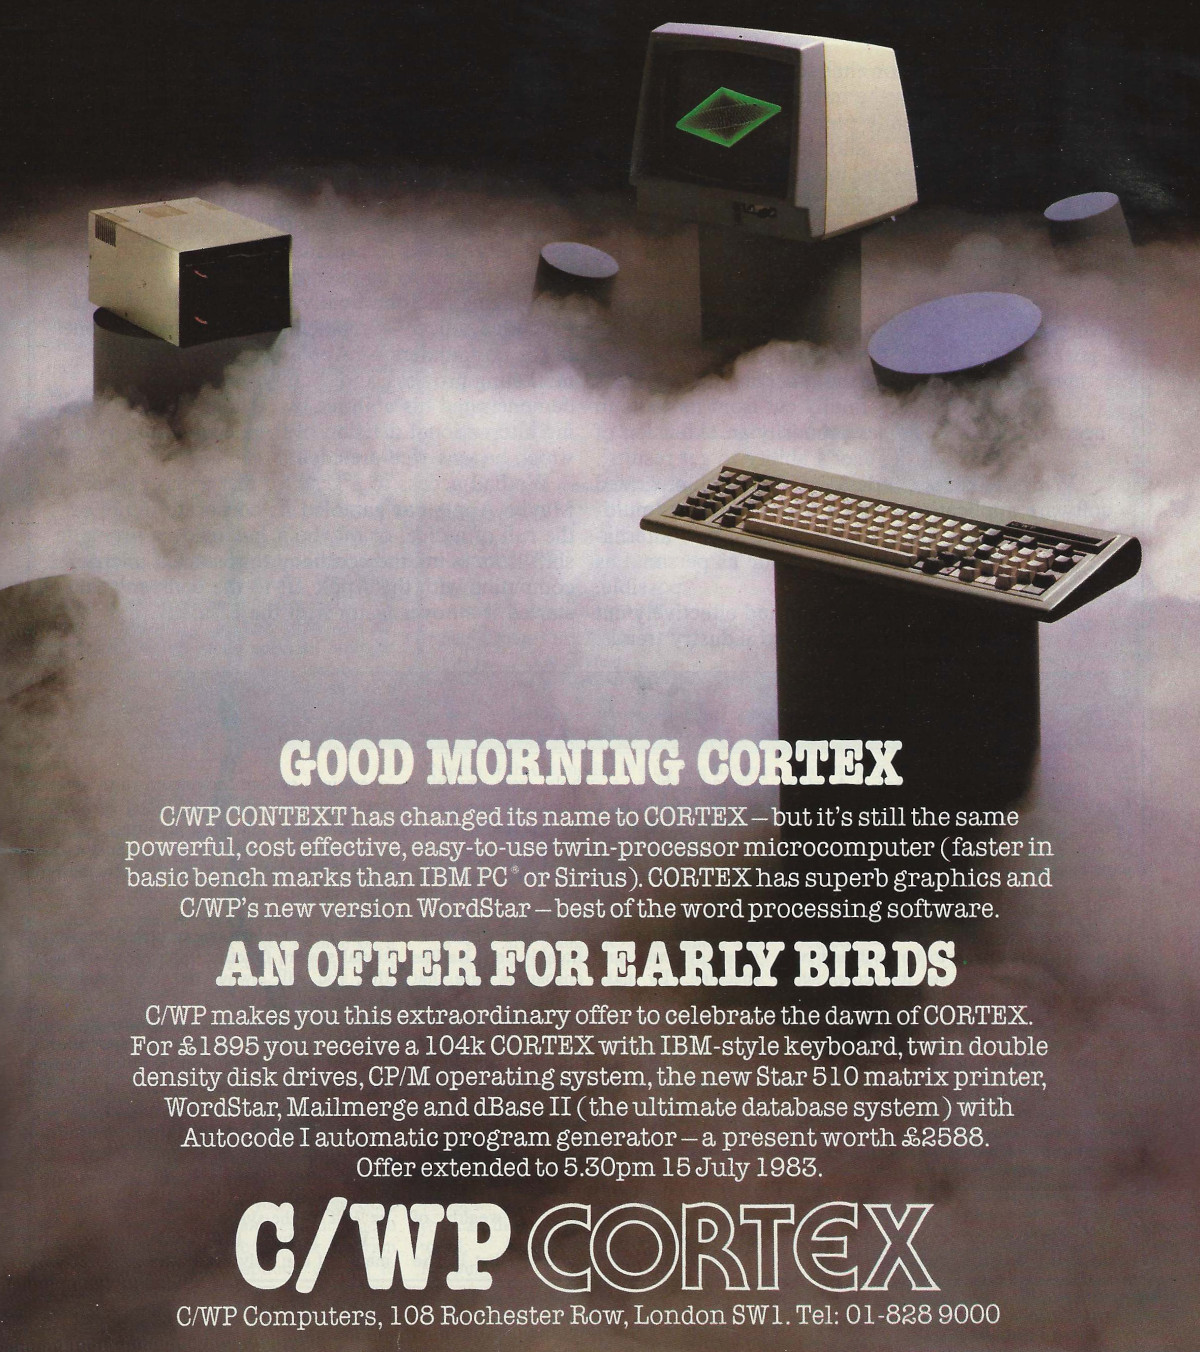 The Context is renamed to Cortex. From Personal Computer World, July 1983